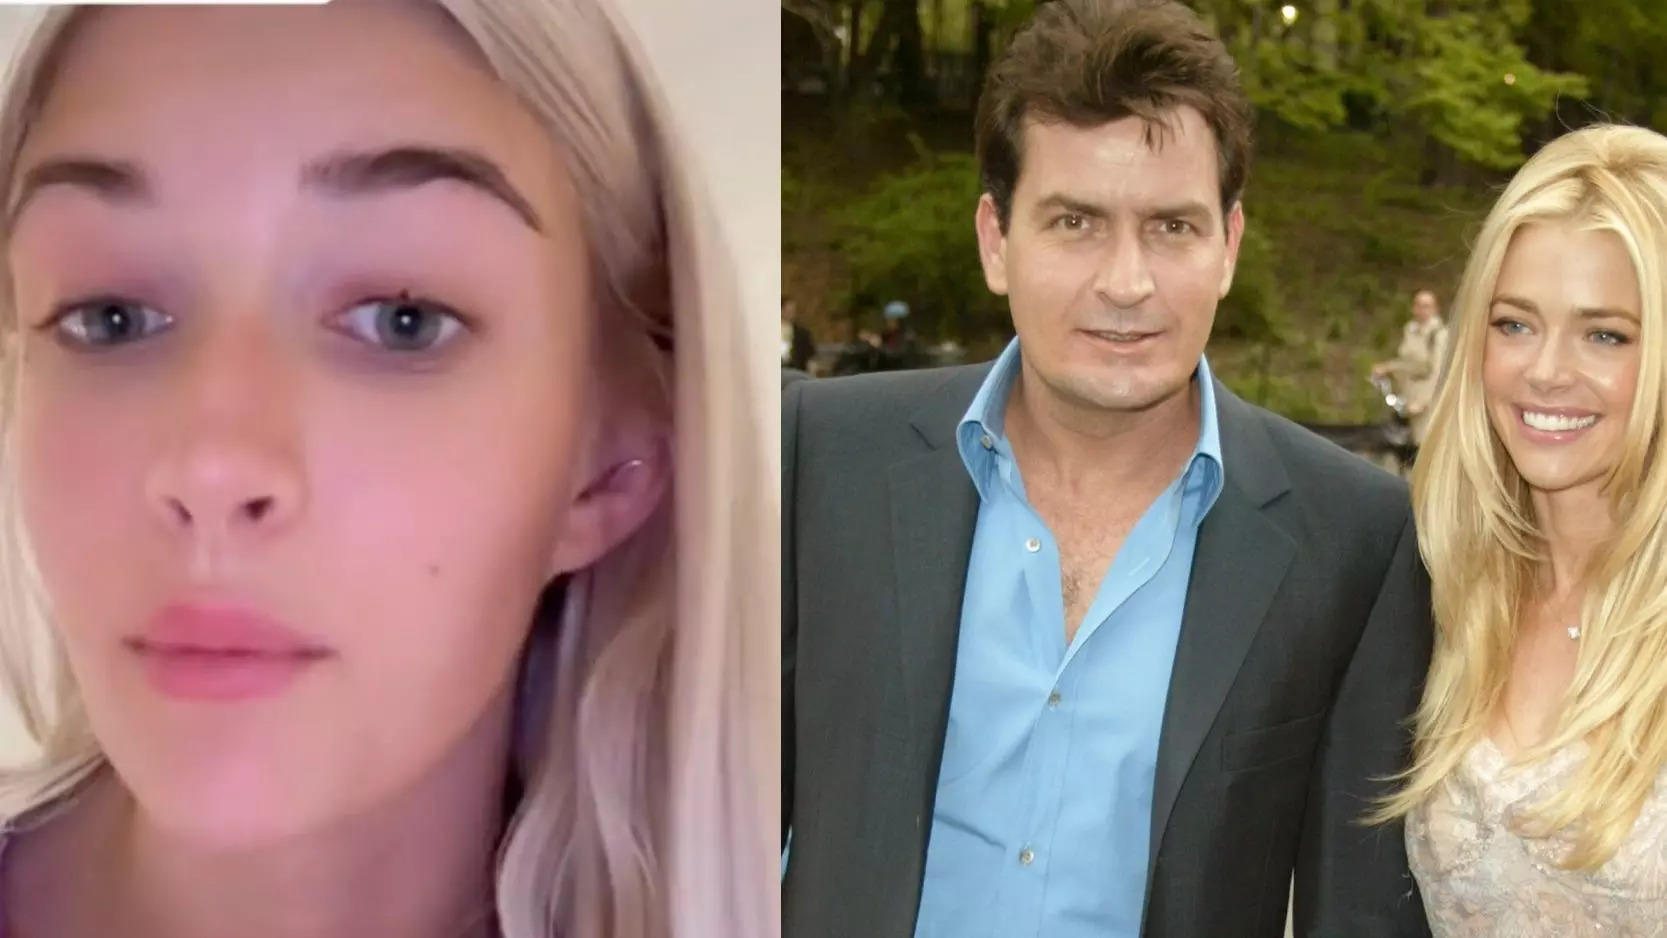 Charlie Sheen and Denise Richards daughter clarifies that shes not a porn star in a TikTok video I dont film myself having sex Business Insider India pic